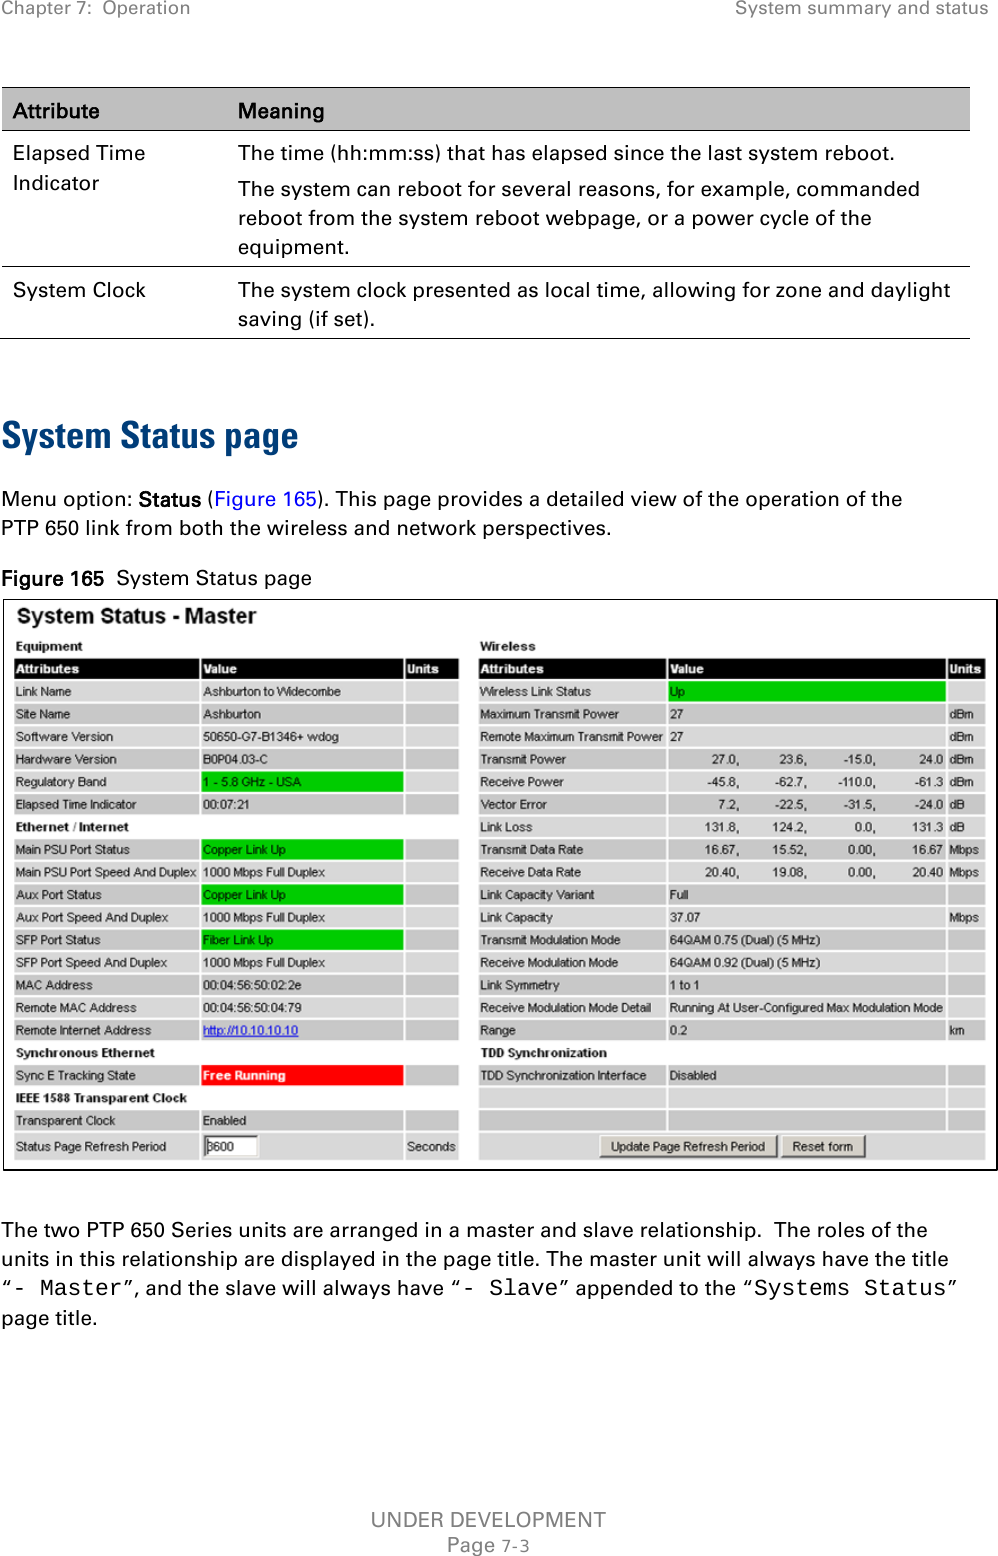 Chapter 7:  Operation System summary and status  Attribute Meaning Elapsed Time Indicator The time (hh:mm:ss) that has elapsed since the last system reboot. The system can reboot for several reasons, for example, commanded reboot from the system reboot webpage, or a power cycle of the equipment. System Clock The system clock presented as local time, allowing for zone and daylight saving (if set).  System Status page Menu option: Status (Figure 165). This page provides a detailed view of the operation of the PTP 650 link from both the wireless and network perspectives. Figure 165  System Status page   The two PTP 650 Series units are arranged in a master and slave relationship.  The roles of the units in this relationship are displayed in the page title. The master unit will always have the title “- Master”, and the slave will always have “- Slave” appended to the “Systems Status” page title.  UNDER DEVELOPMENT Page 7-3 